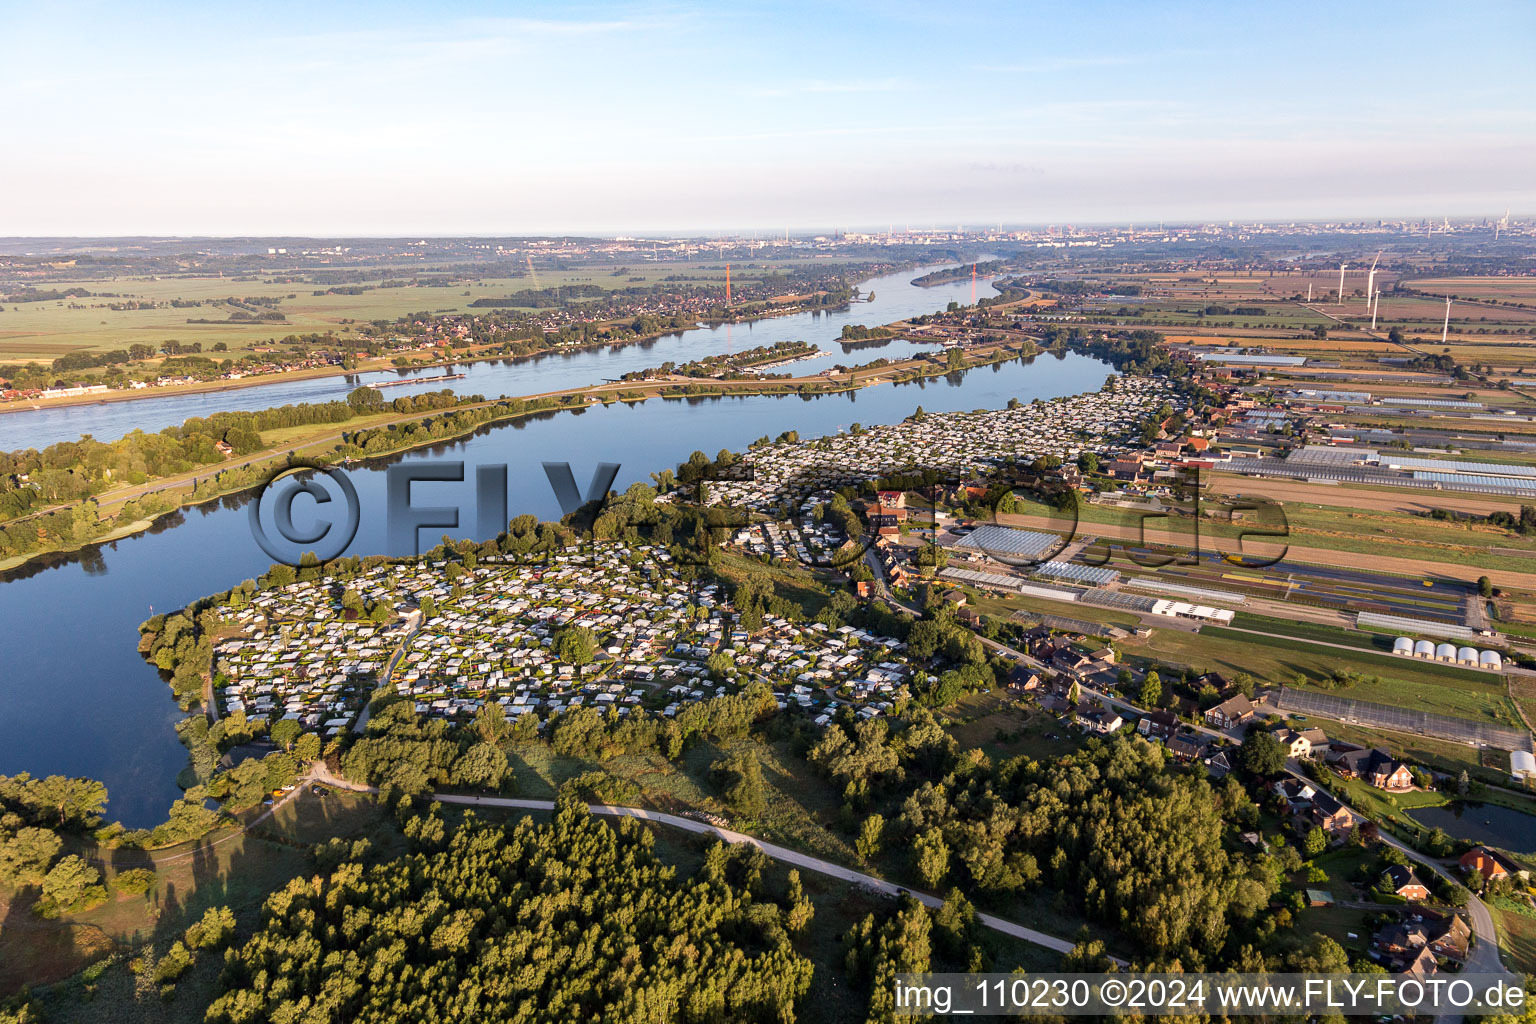 Camping with caravans and tents on the Elbe dyke in the district Ochsenwerder in Hamburg, Germany